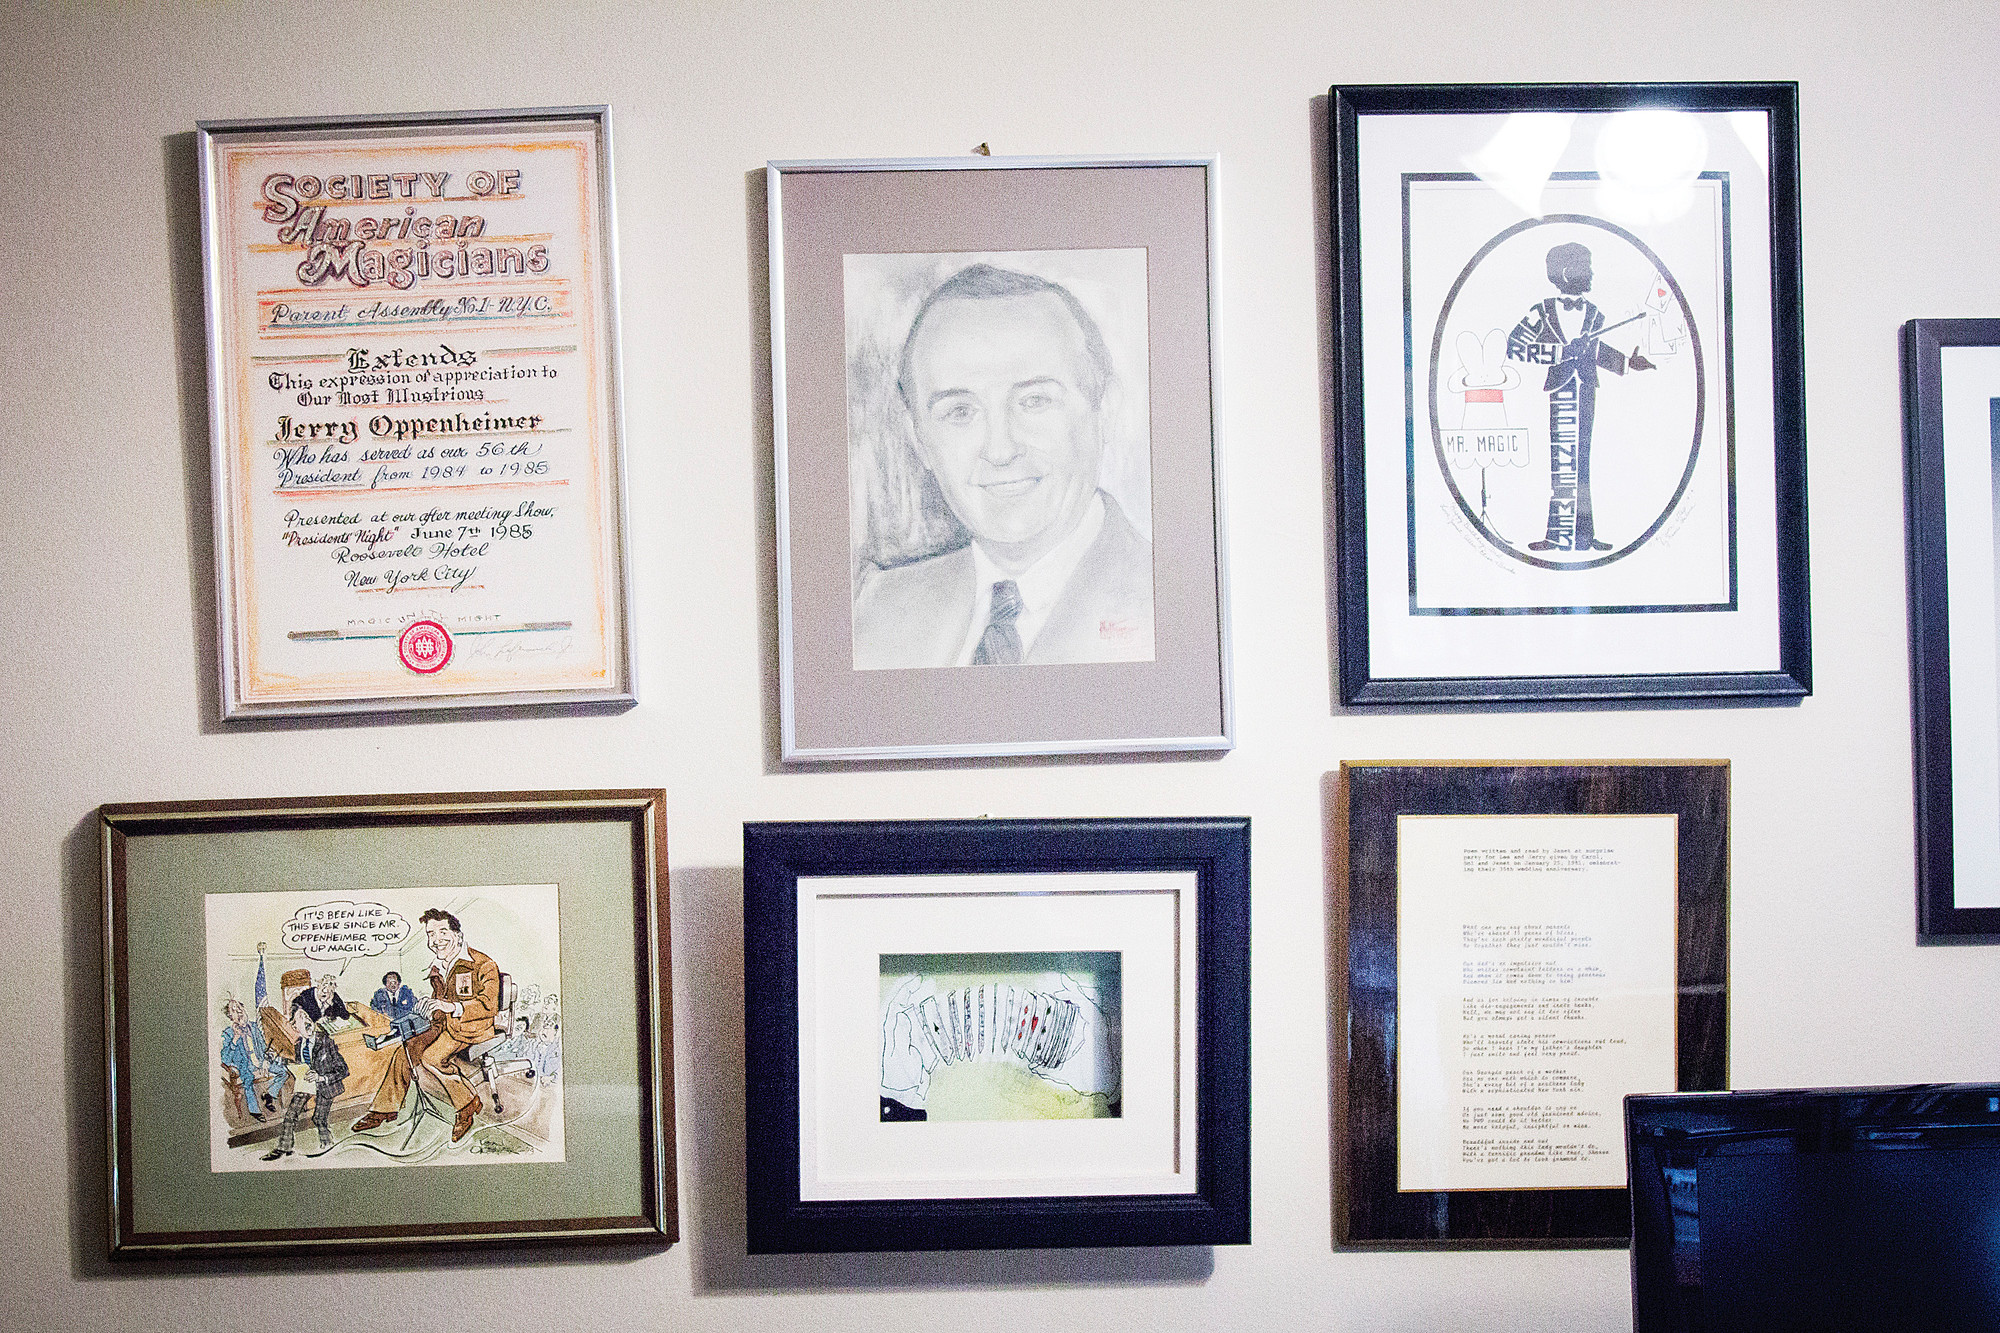 Pictures and text in the home of Jerry Oppenheimer, 93, on June 19.